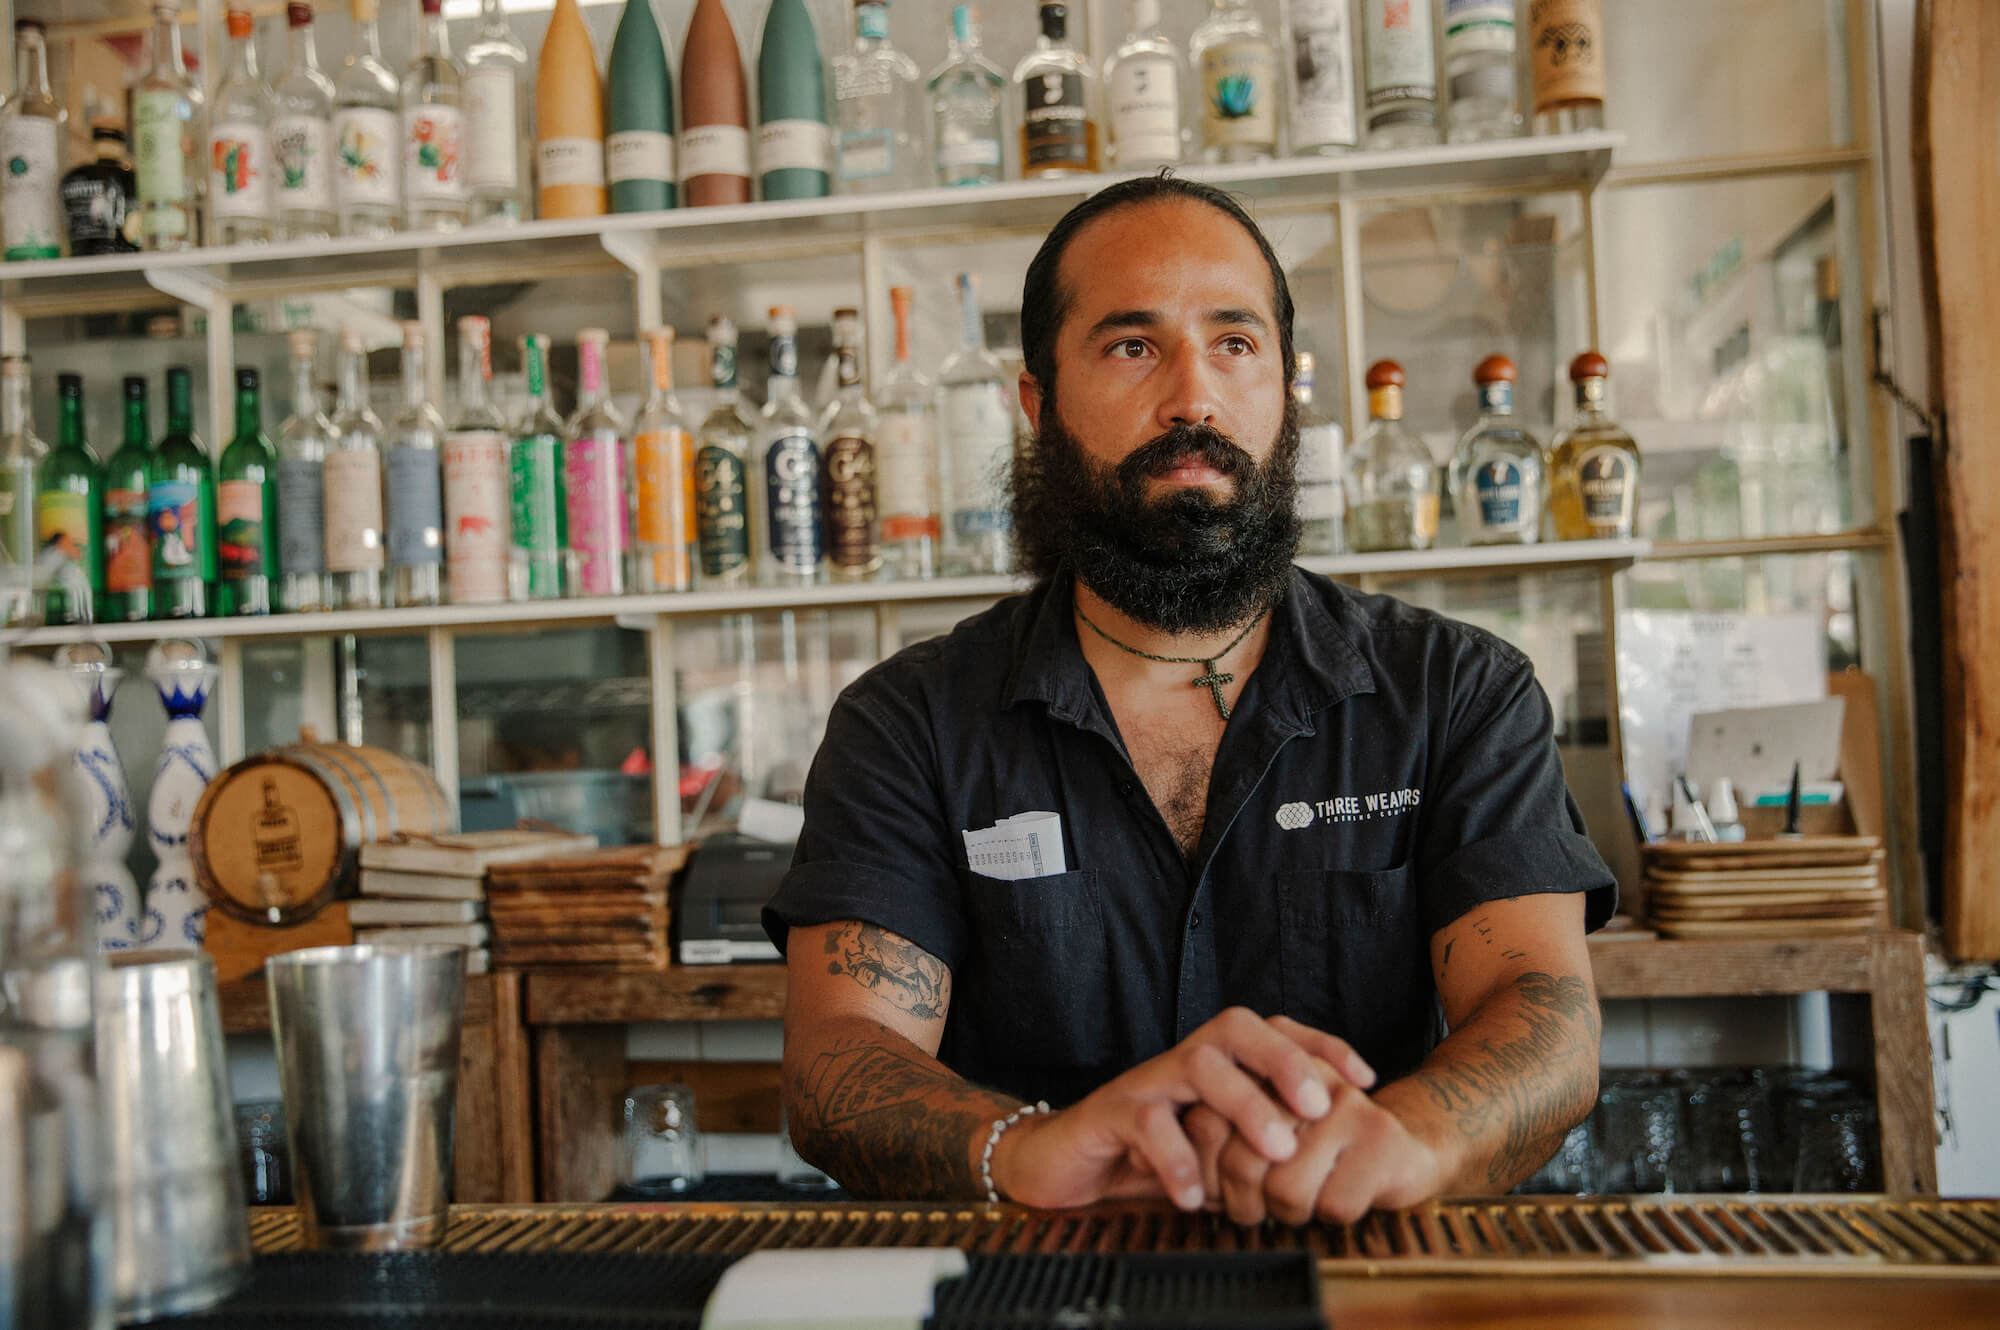 Tony Gutierrez, the operations manager at Chulita, has only worked on Rose Avenue for three years, but sees himself as a guardian of the community he's come to value.